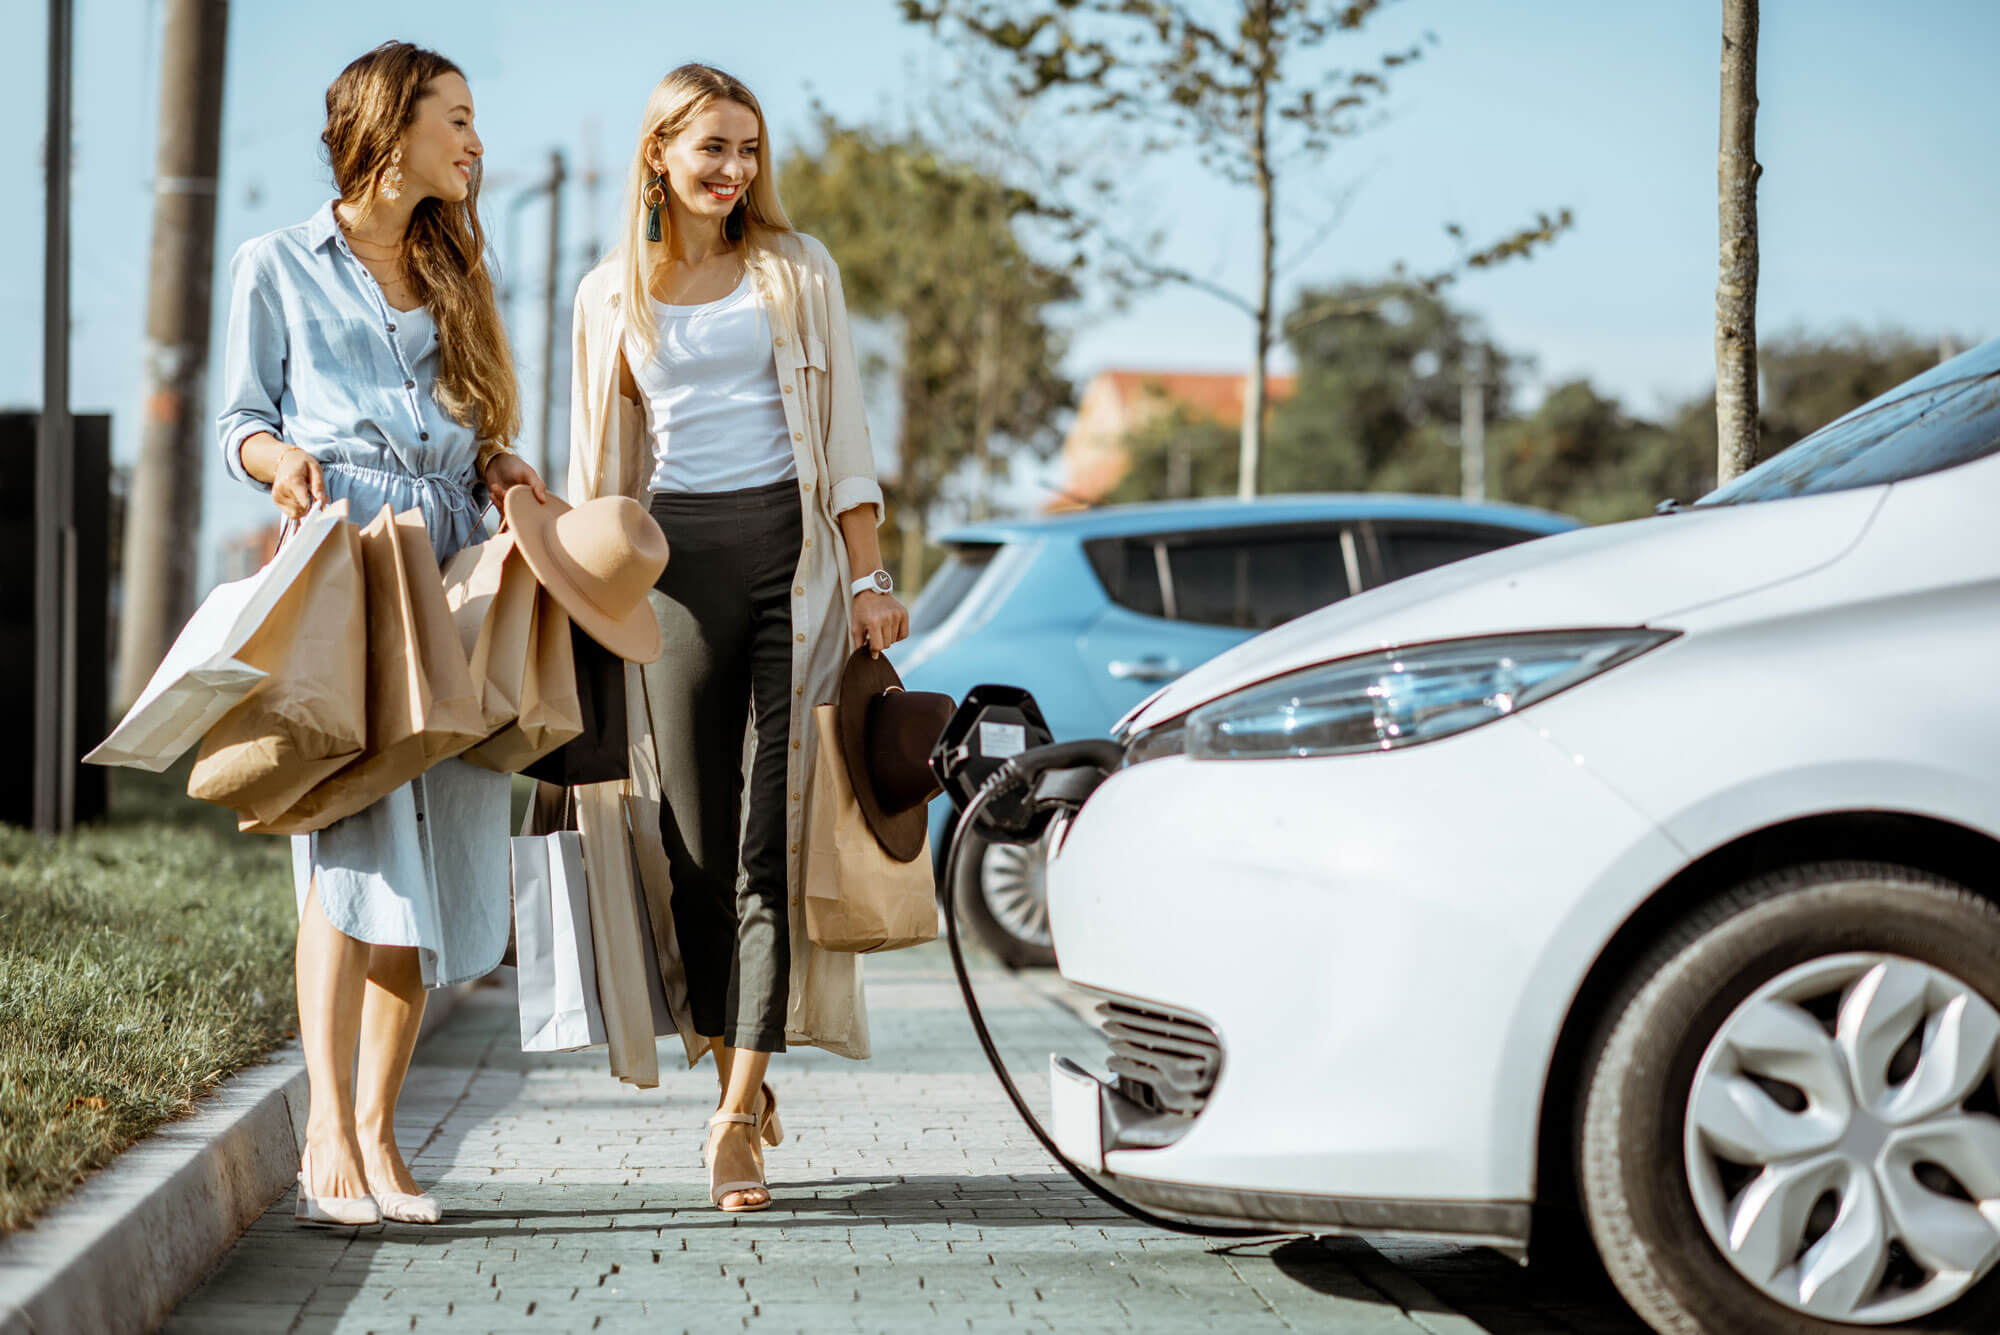 Shoppers looking at a charging car in a car park.